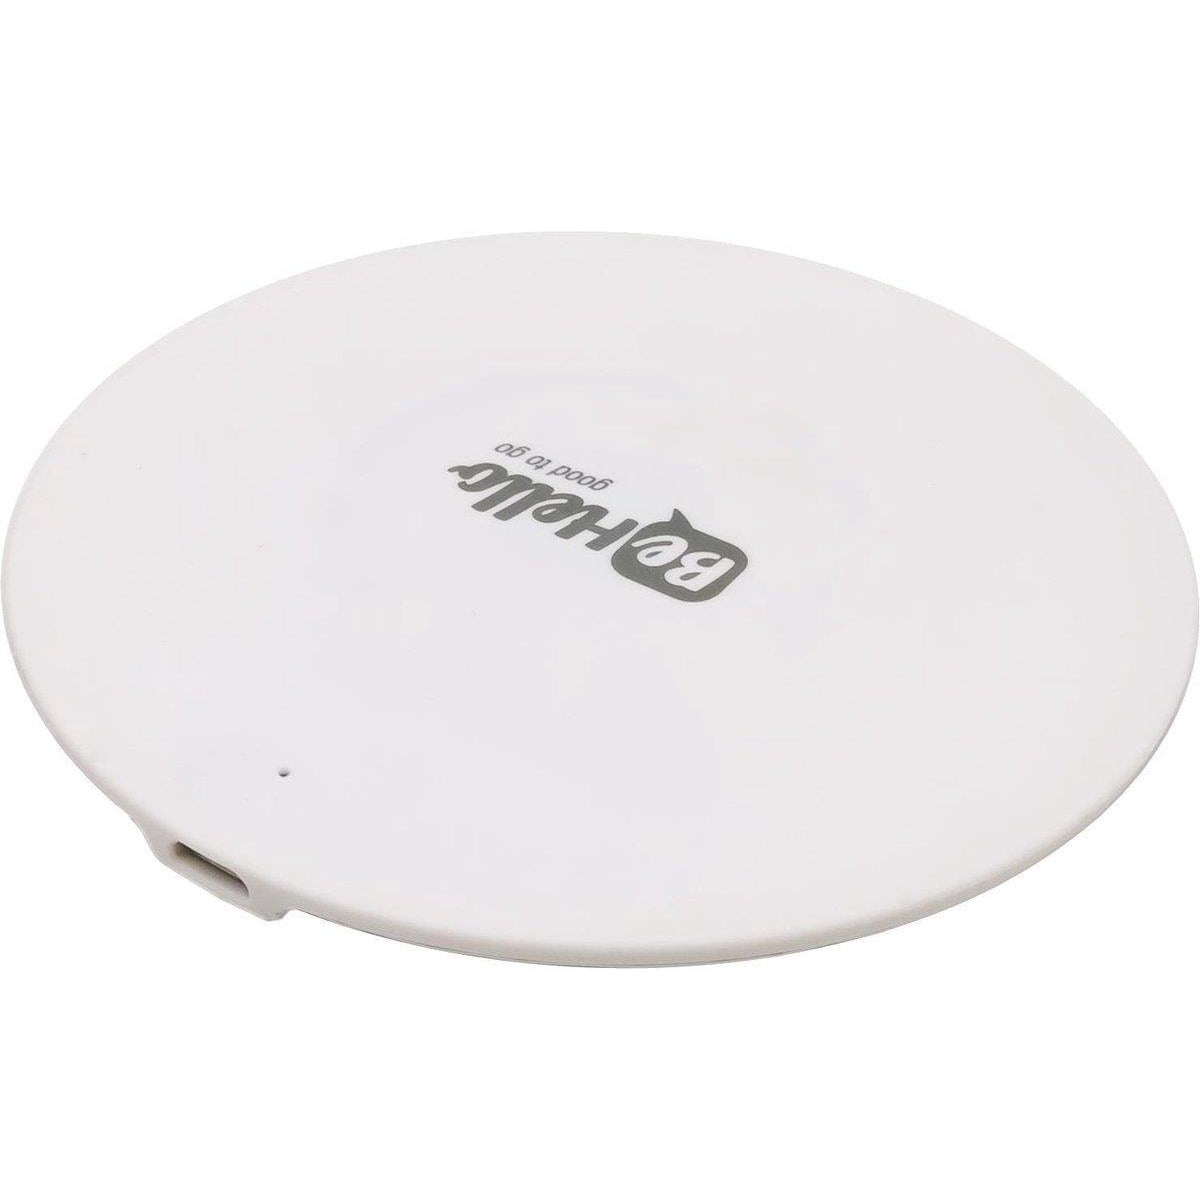 Behello Fast Wireless Charger Charging Pad 5w / 10w, Samsung, Apple - White